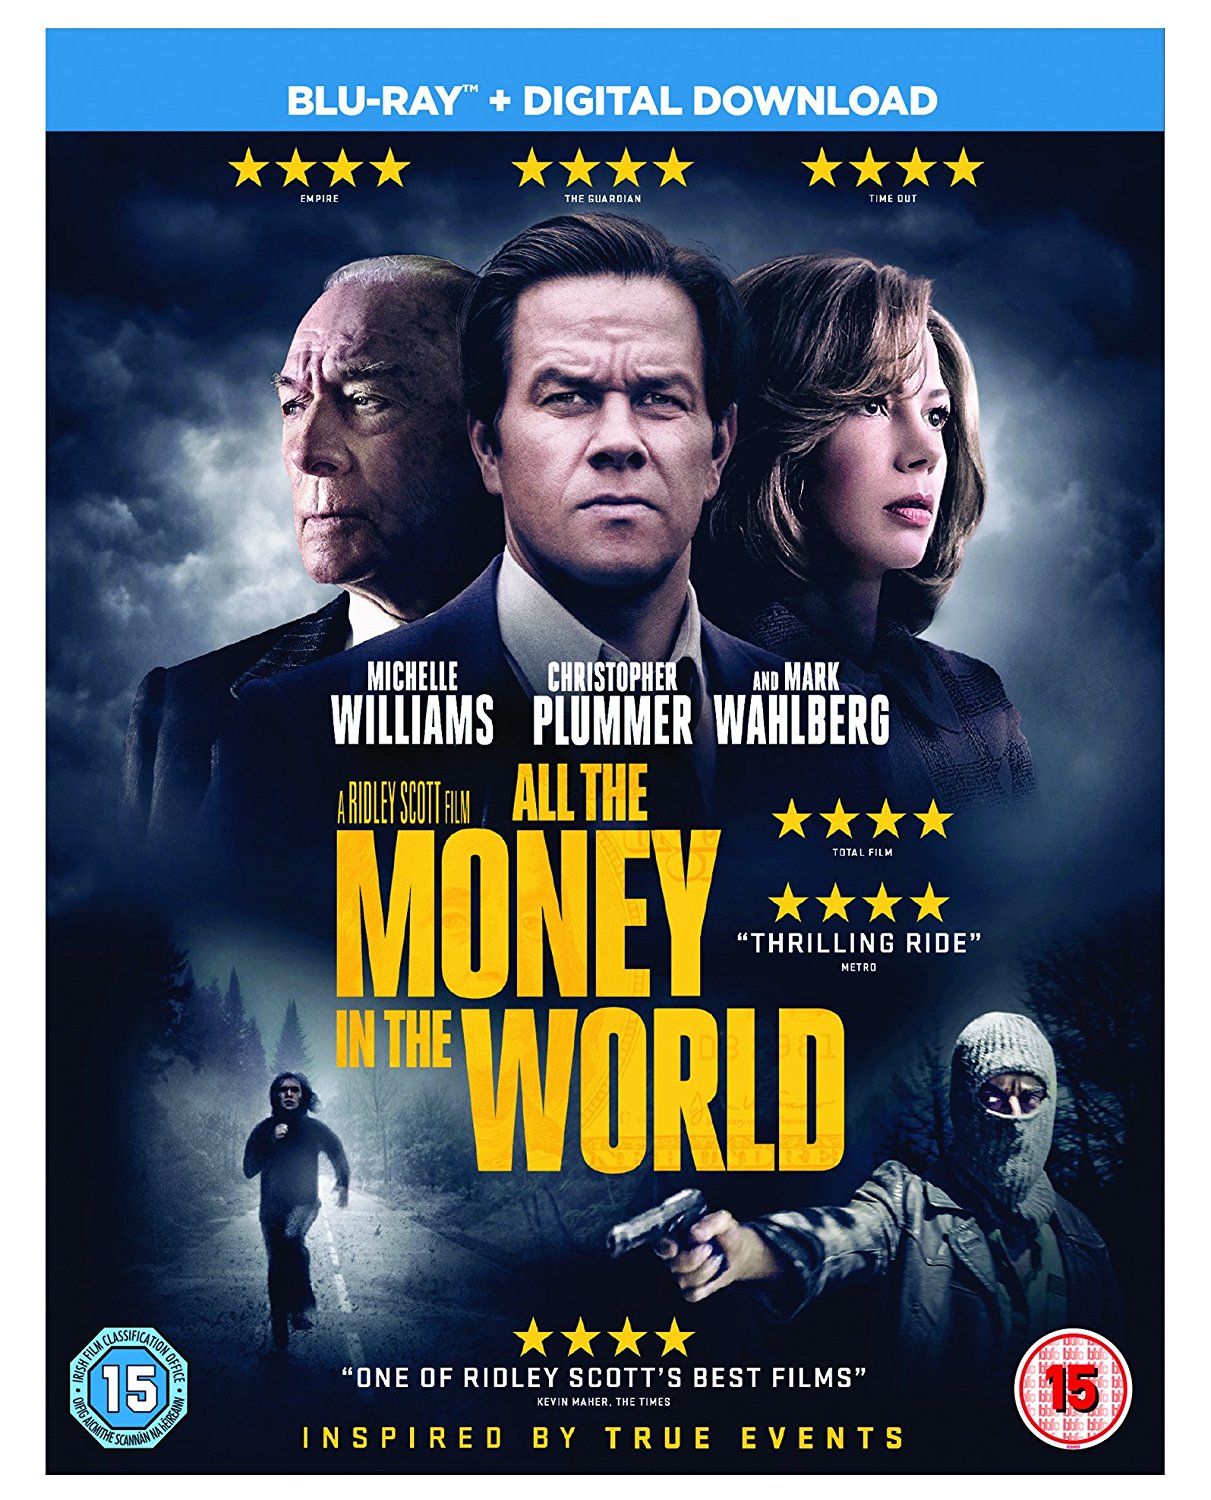 boom competitions - win All the Money in the World on Blu-ray